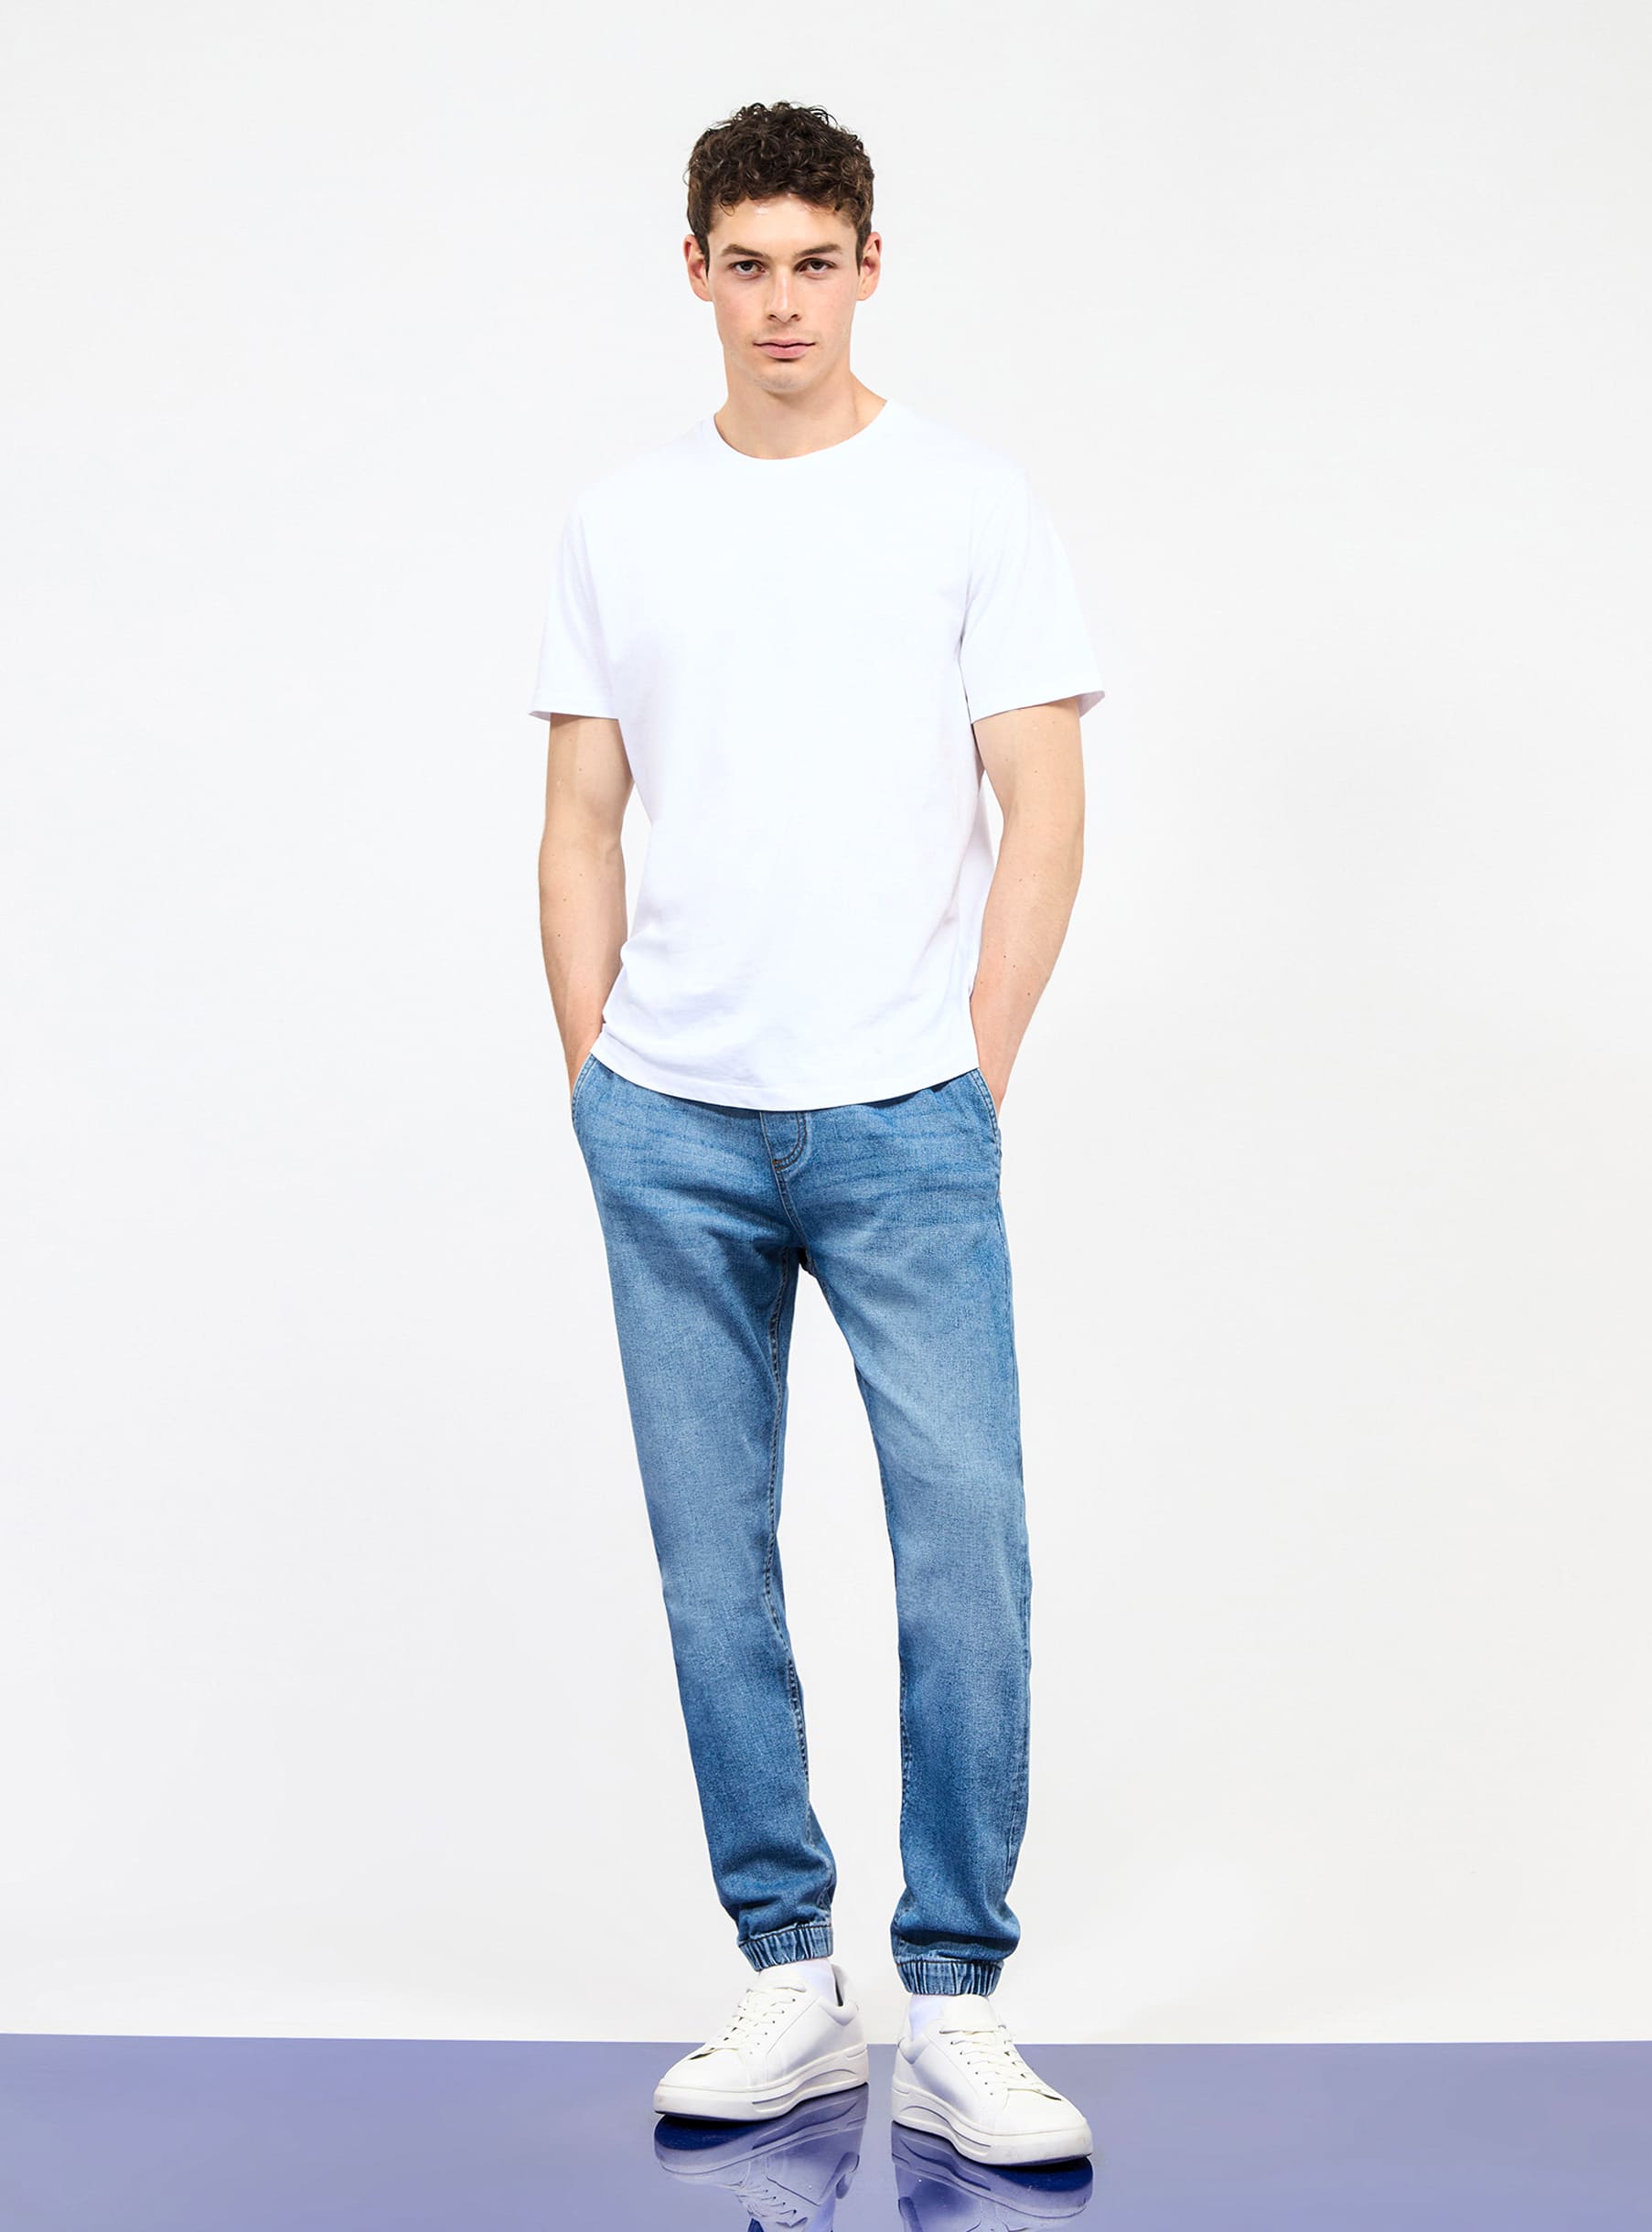 The Ultimate Guide To Wear The best Shoes With Blue Jeans-Bruno Marc